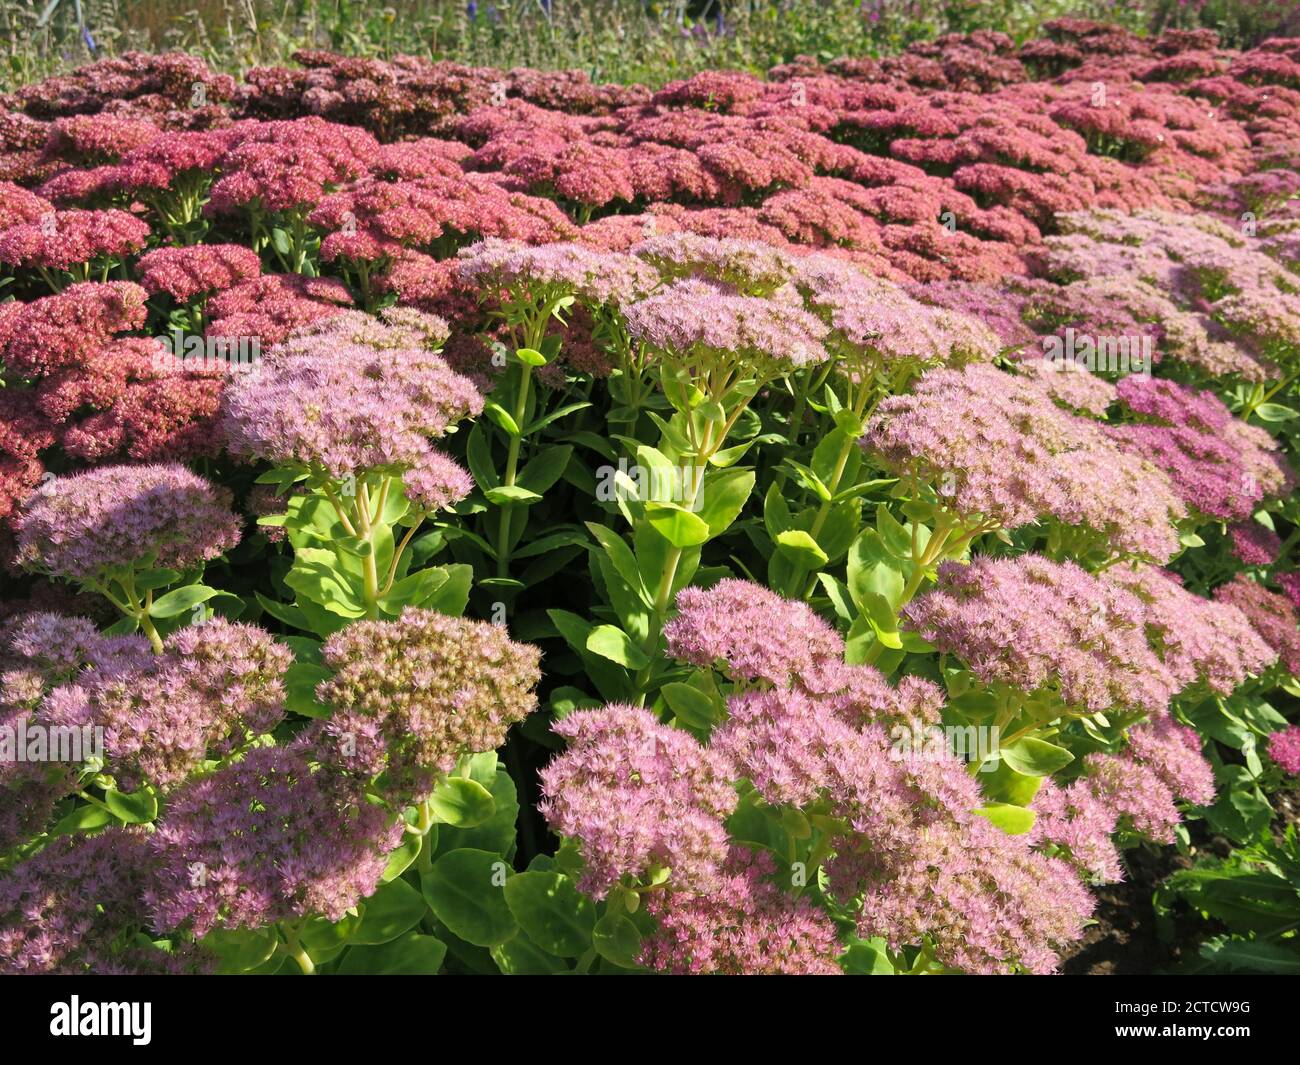 A stock bed in the nursery at Waterperry Gardens showing a colourful display of sedums Autumn Joy, Makinoi Matrona & Spectabile Meteor Stock Photo